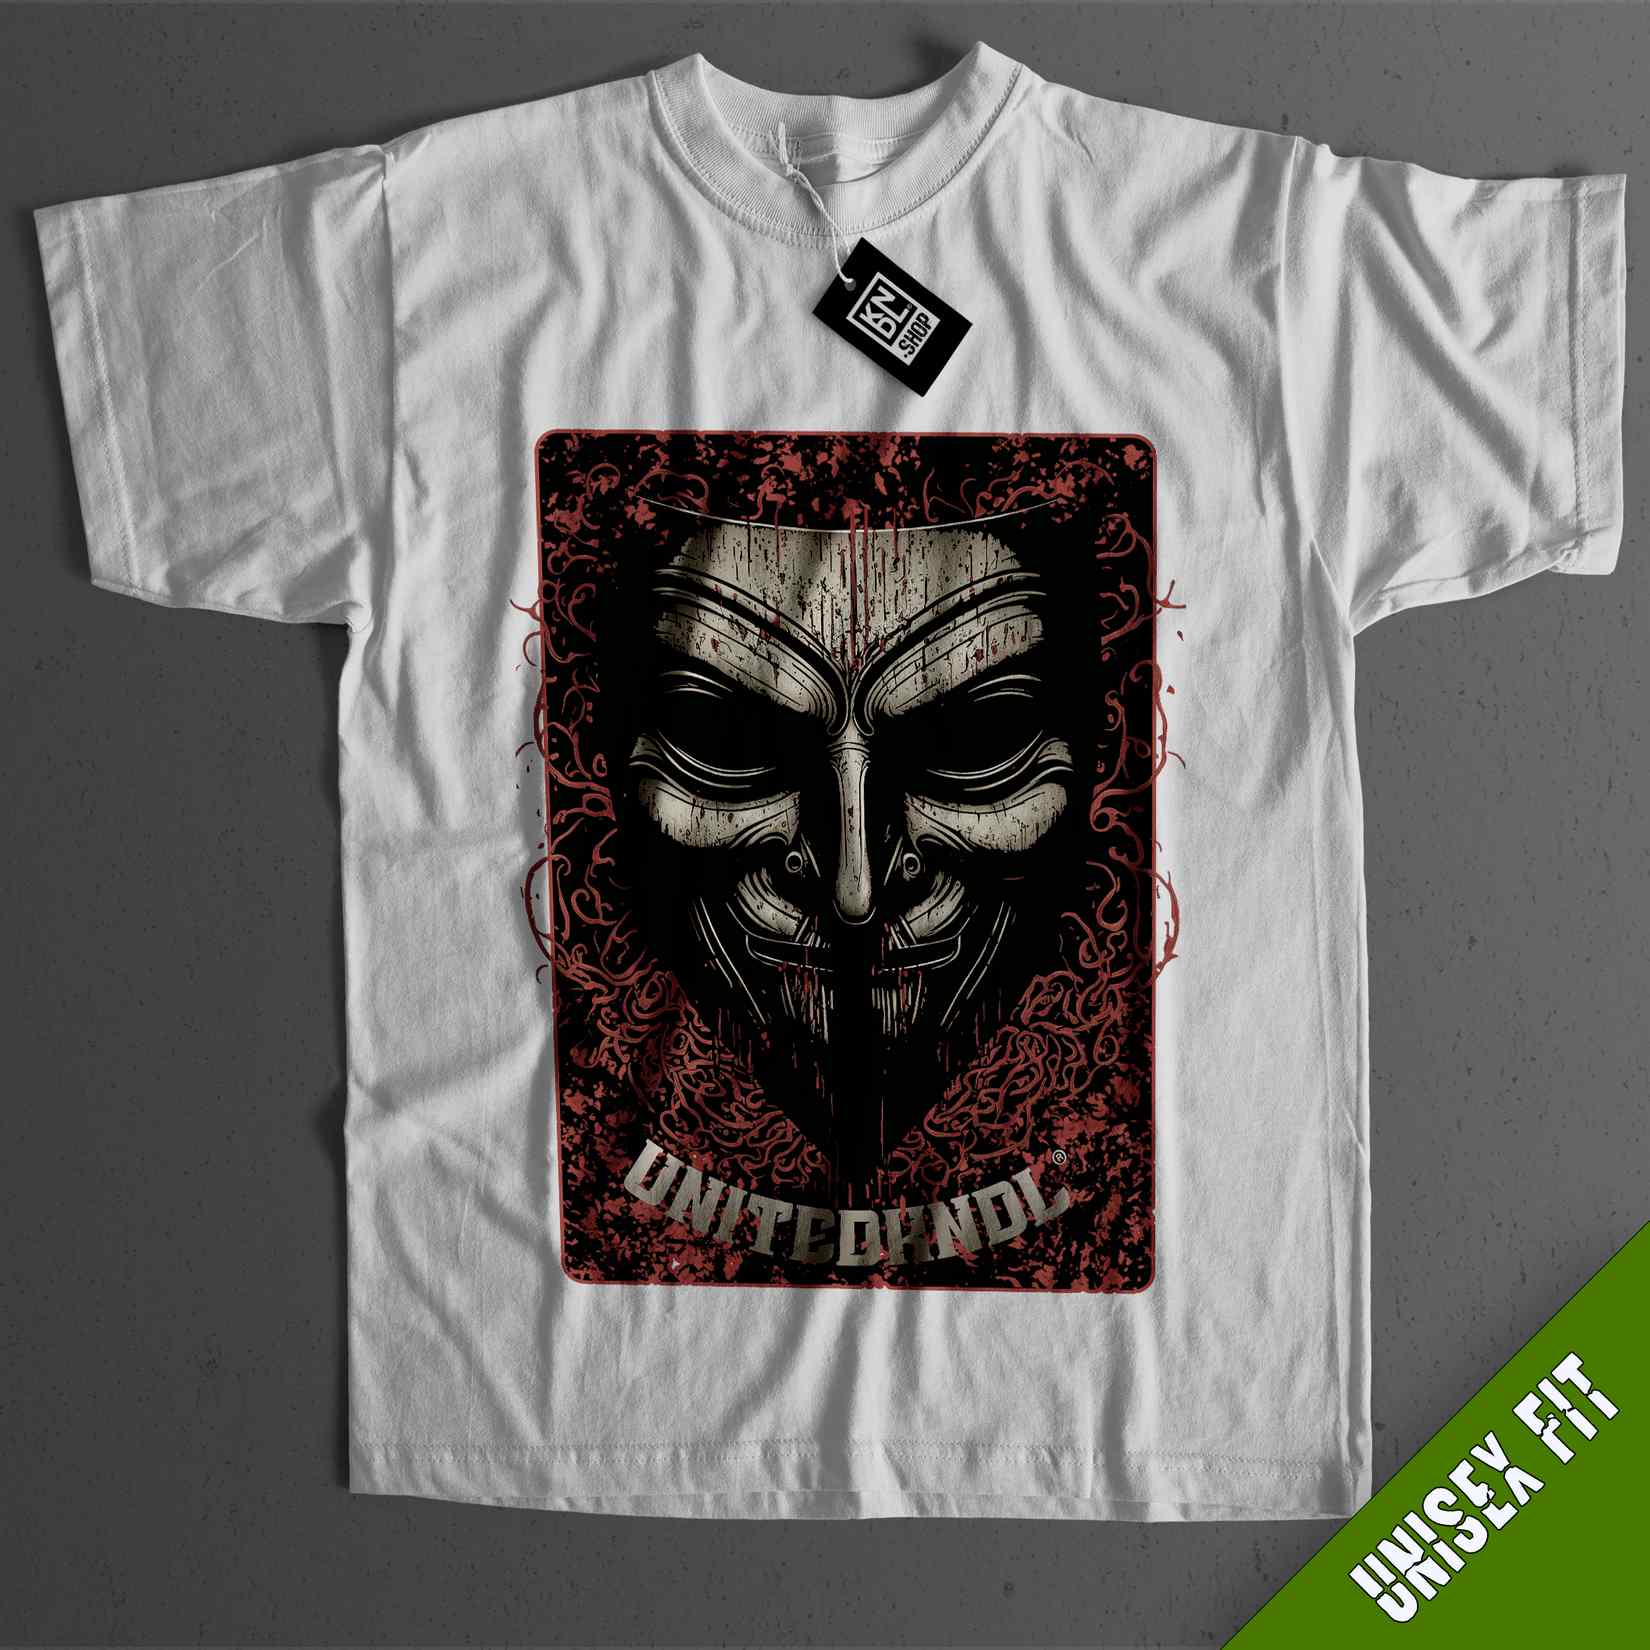 a white t - shirt with an image of a creepy mask on it